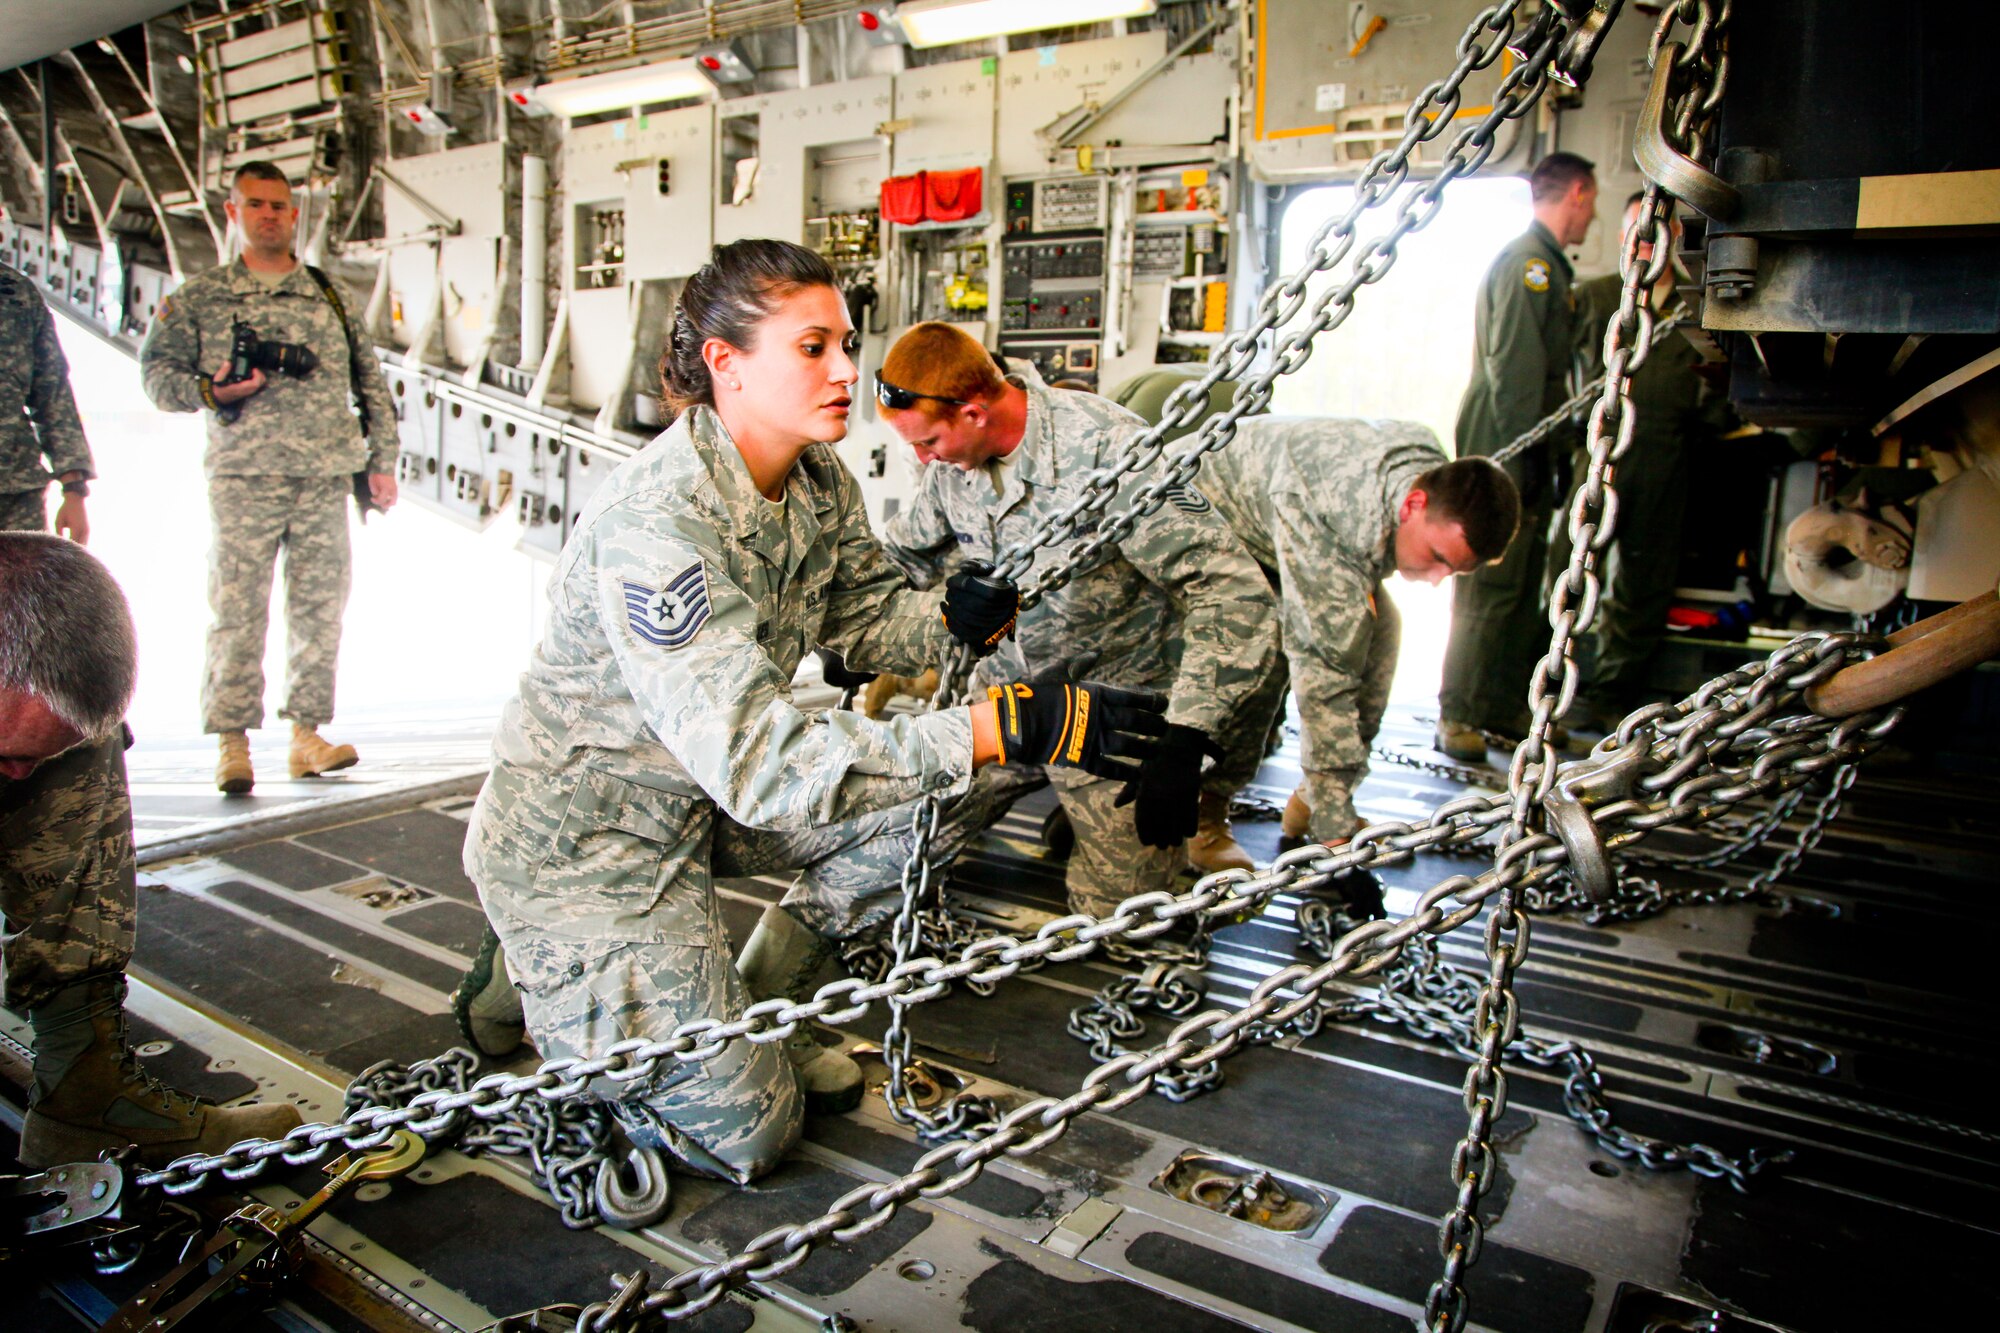 Tech. Sgt. Catherine Desilles, an air transportation specialist with the 38th Aerial Port Squadron at Joint Base Charleston, S.C., grabs hold of a tie down chain as she and her team secure an M1A1SA Abrams main battle tank to the floor of a C-17 Globemaster III Thursday at Wright Army Airfield, Ga. C-17's from JB Charleston, S.C., and Wright-Patterson Air Force Base, Ohio, transported four tanks from Wright AAF to McEntire Air National Guard Base, S.C., in support of a tank movement for the 1/118th CAB. (U.S. Air Force photo by Staff Sgt. Rashard Coaxum/released)